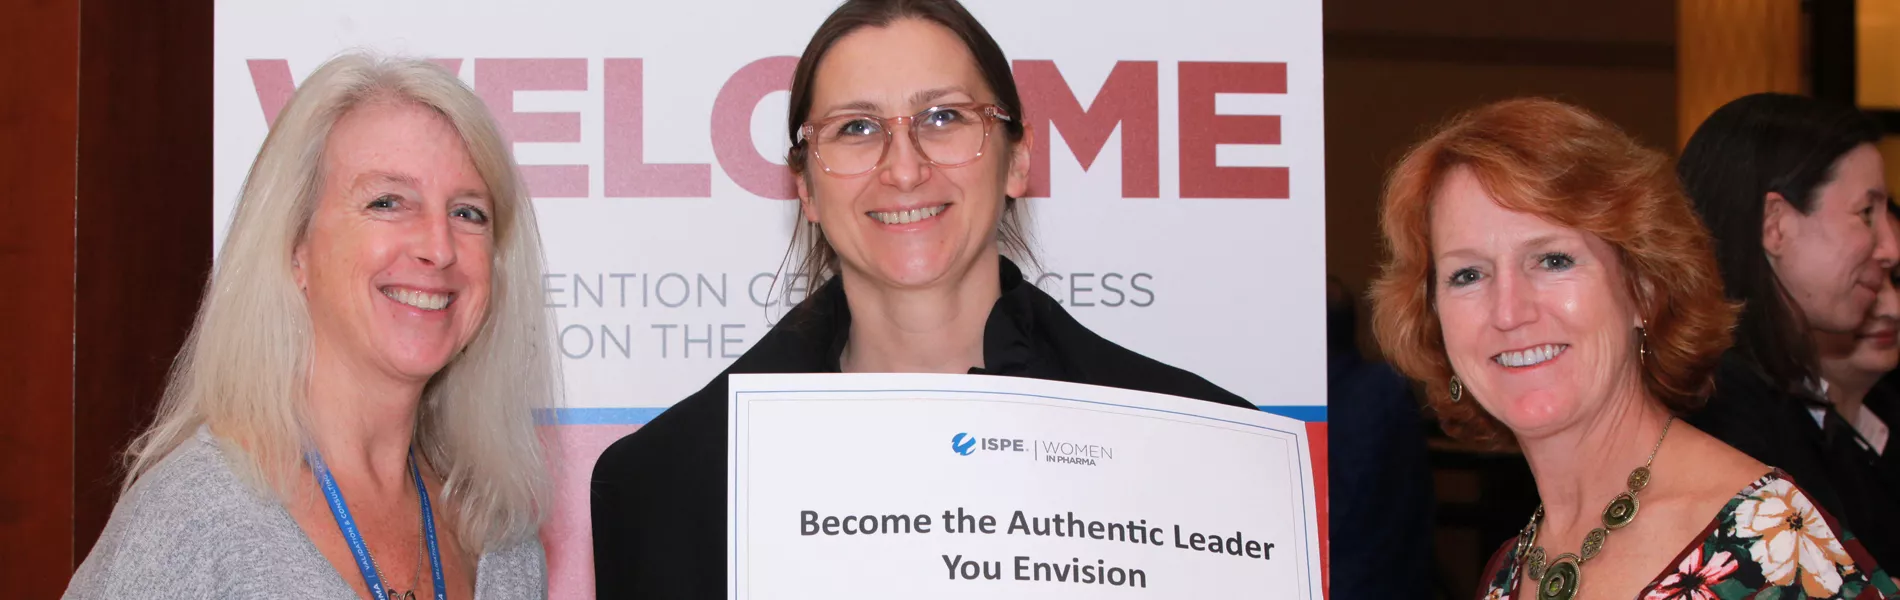 How to Become the Authentic Leader You Envision